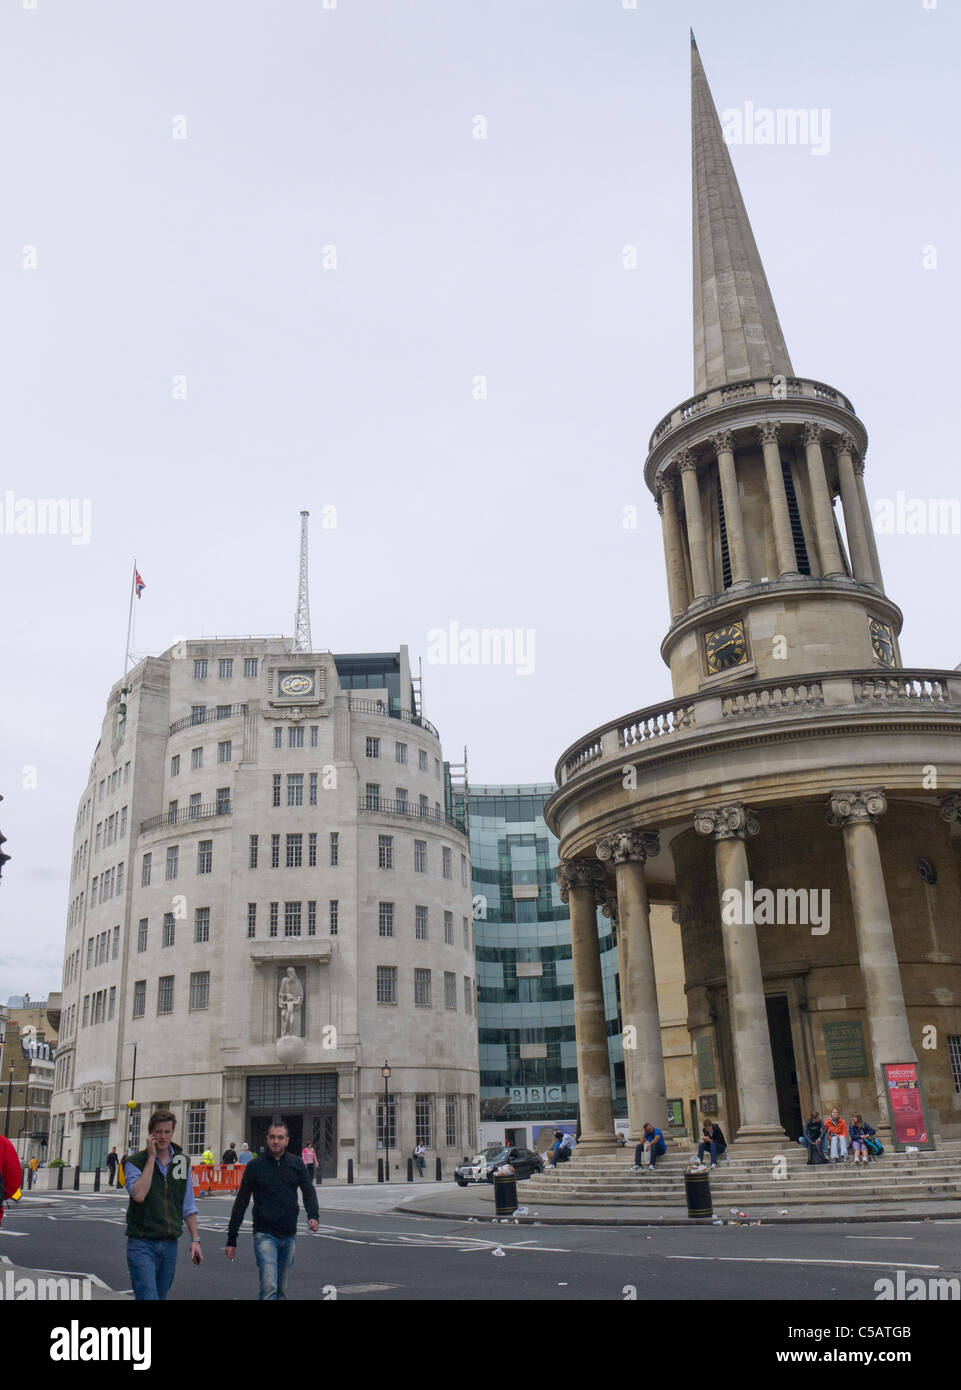 Broadcasting House And All Souls Church Langham Place London England